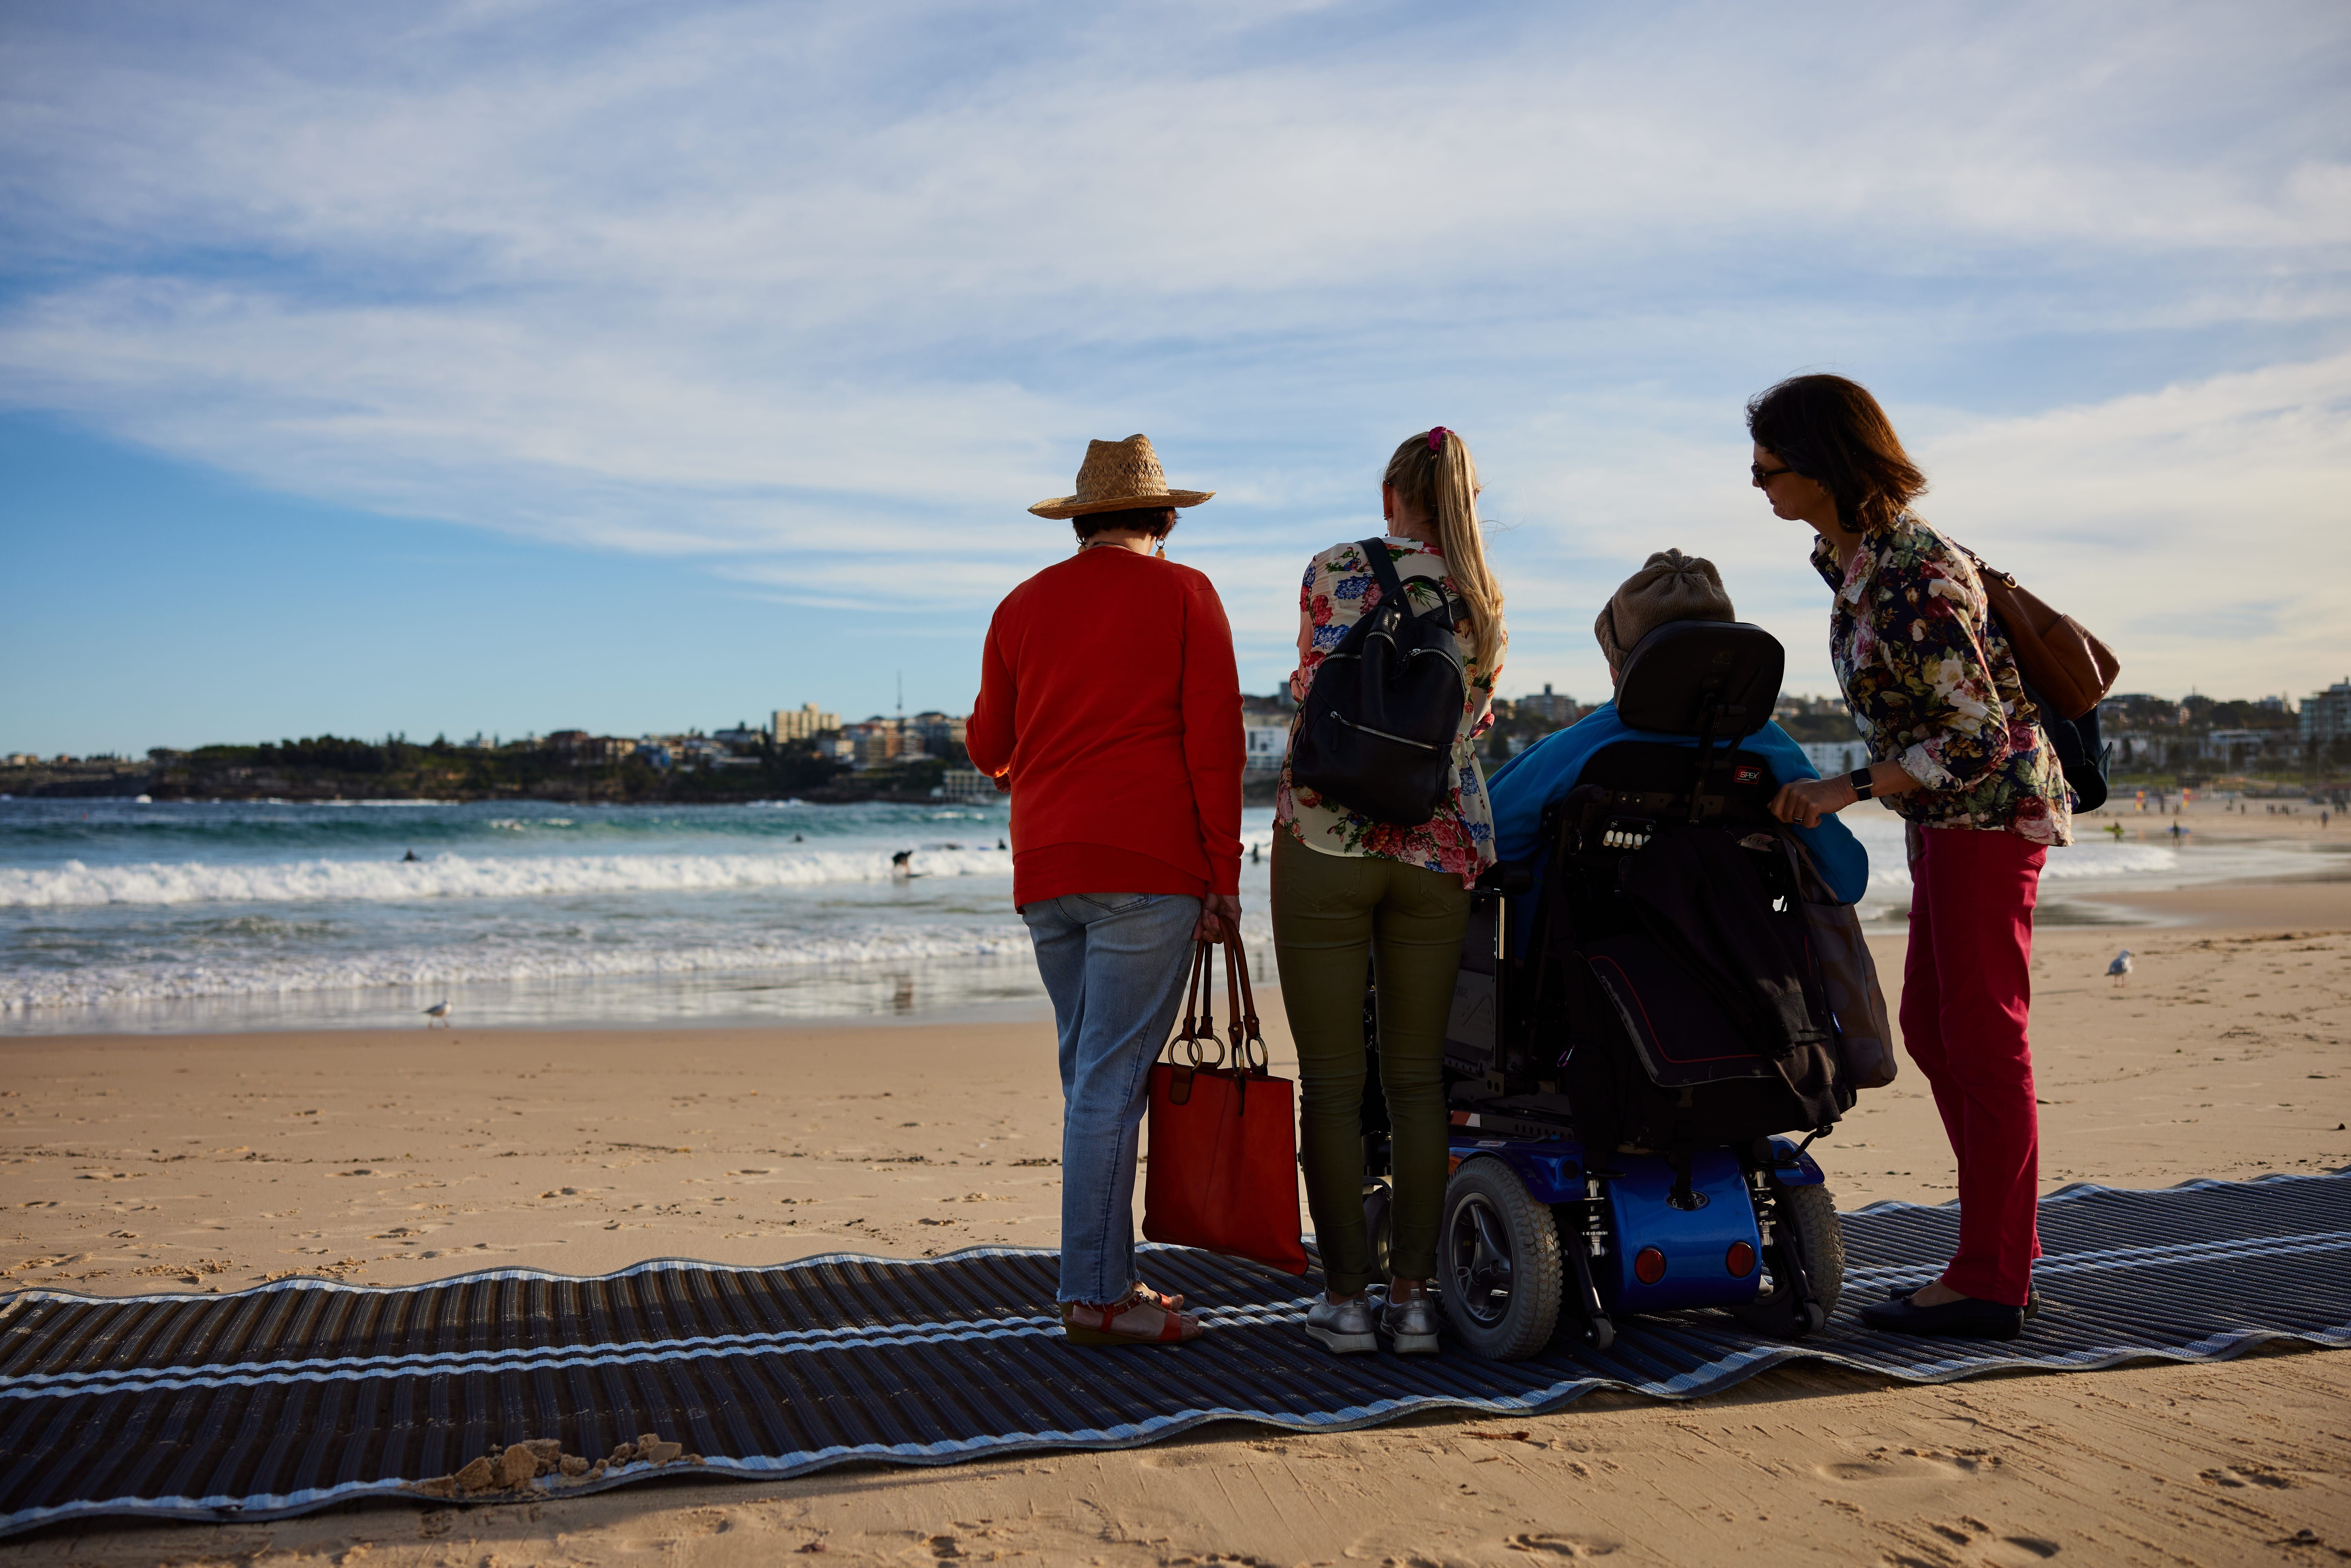 While Bondi Beach does having matting, visitors have to call up and request it